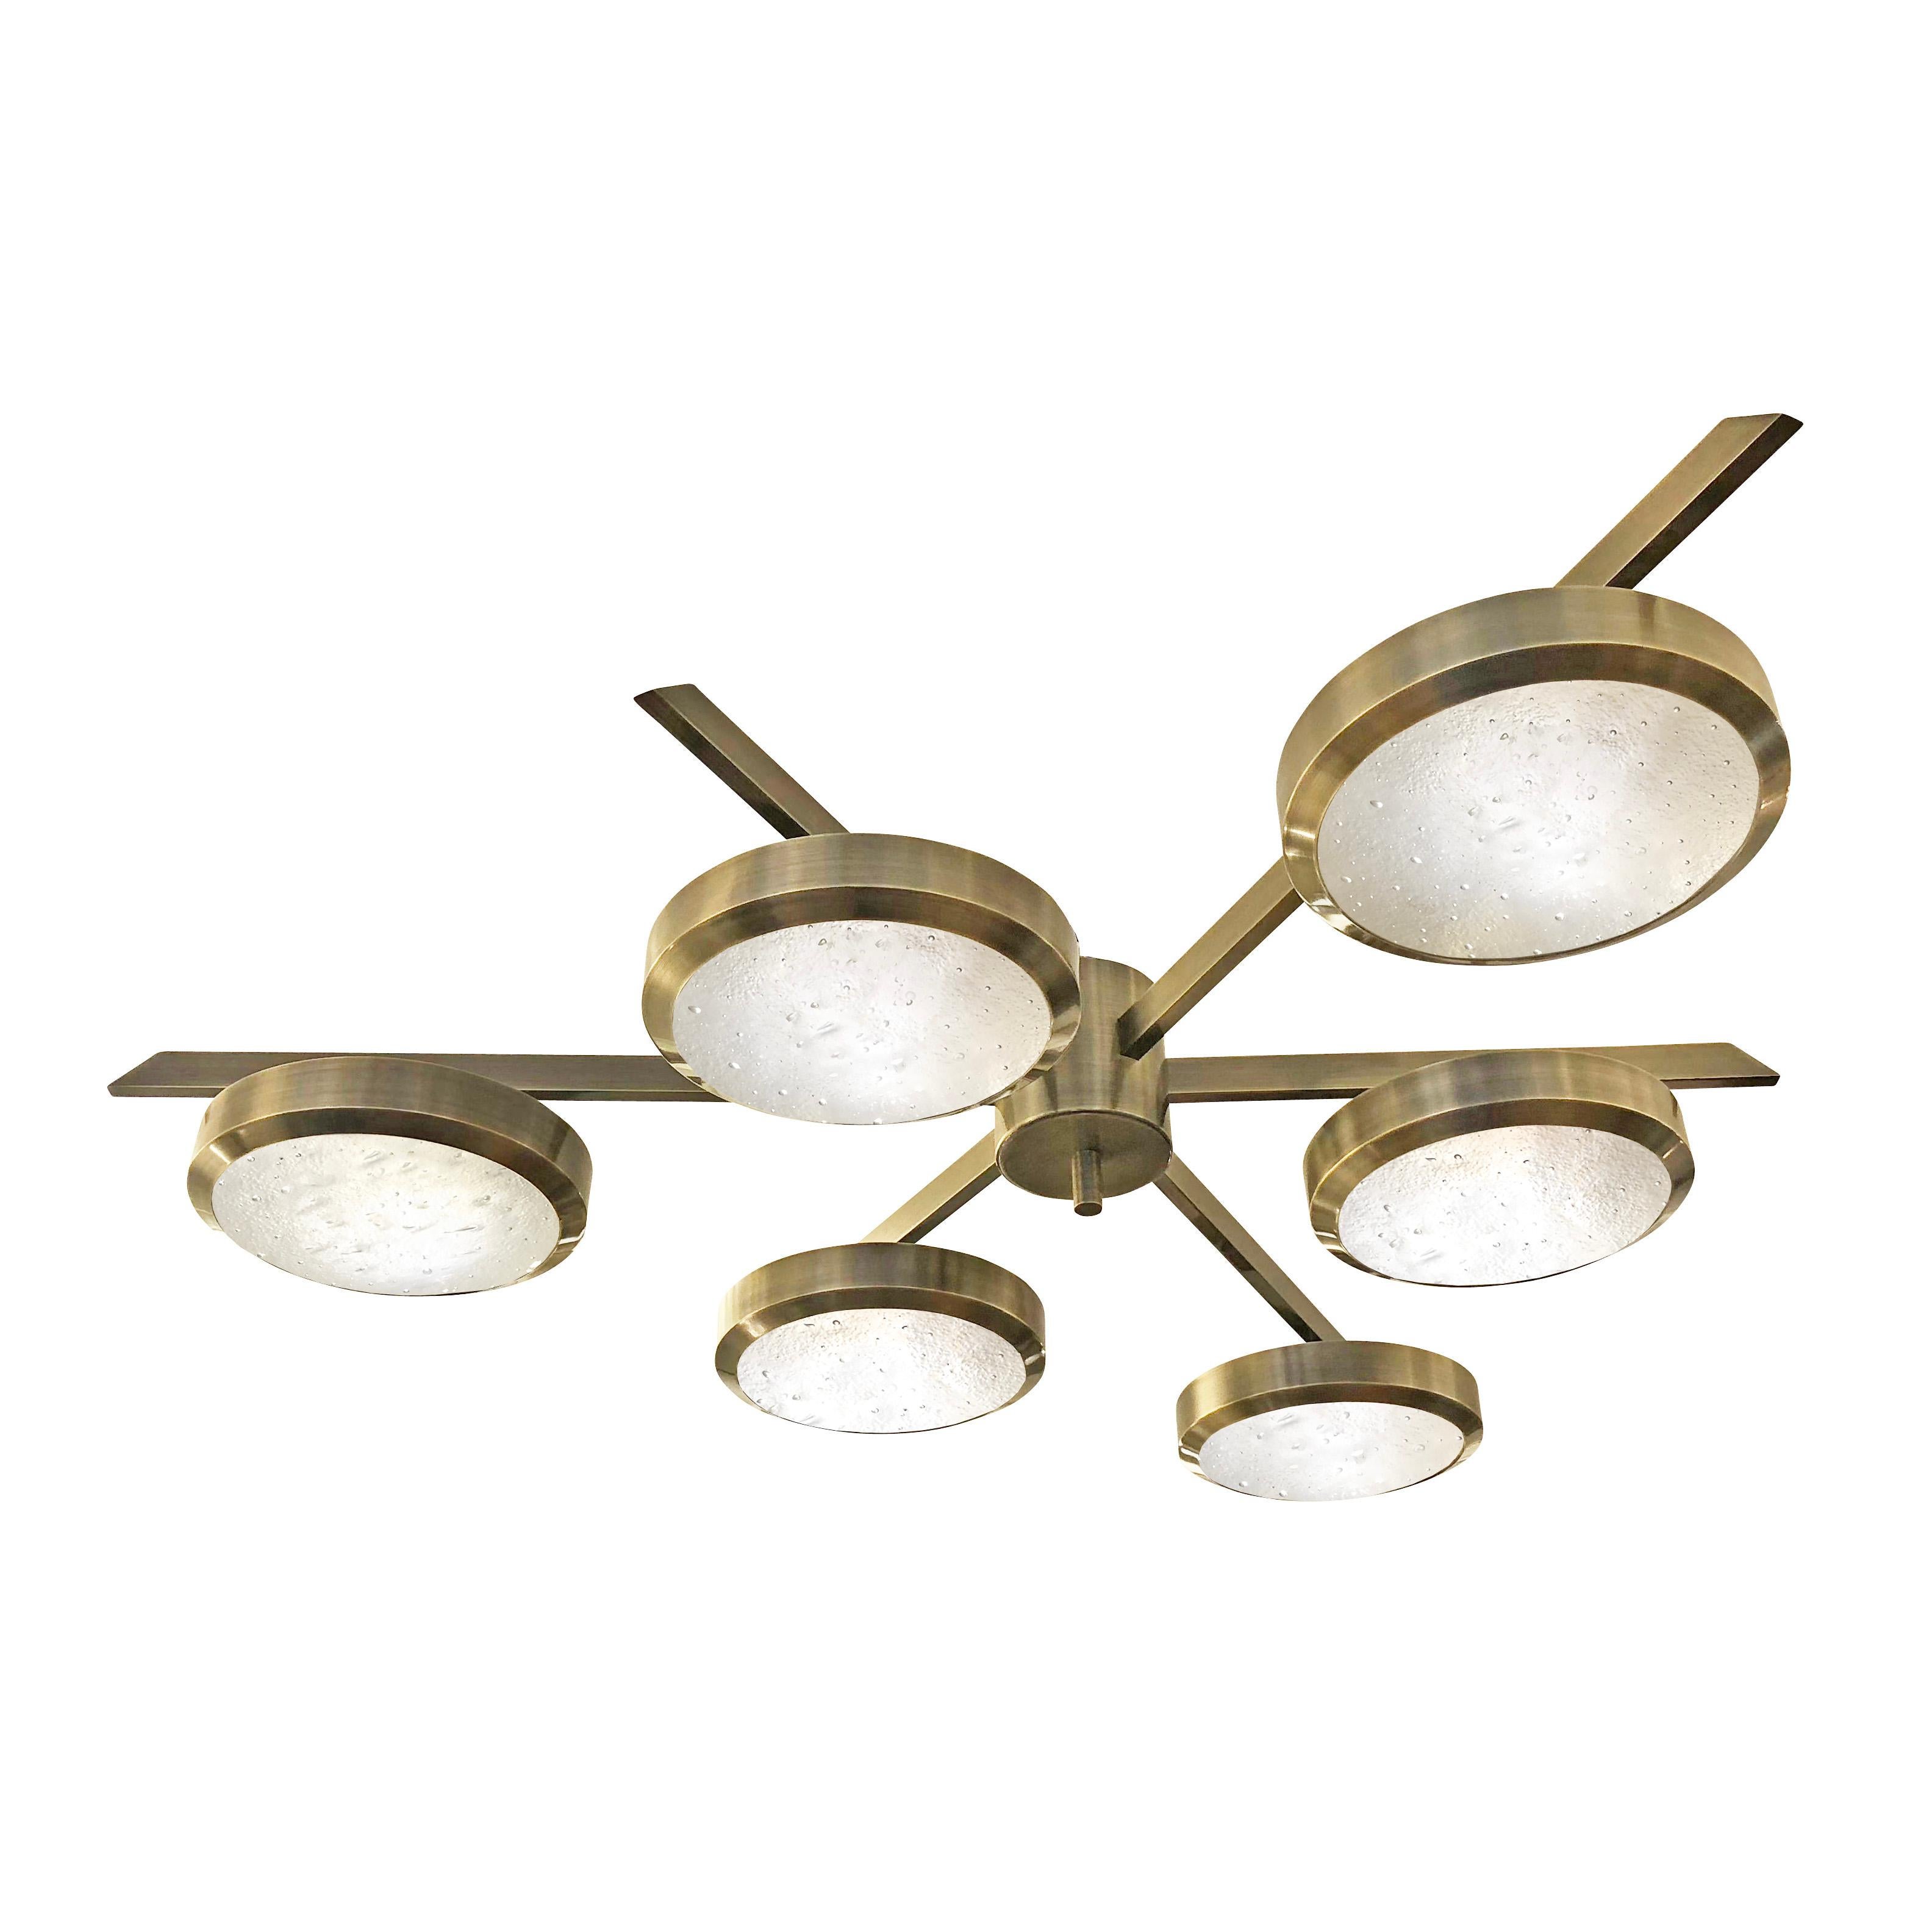 The Sei ceiling light is characterized by its star shaped frame with six suspended Murano glass shades. Shown as a flush mount in the bronzo ottone finish with our signature Murano bubble glass. Starting from $13,500.00 for the stock model in